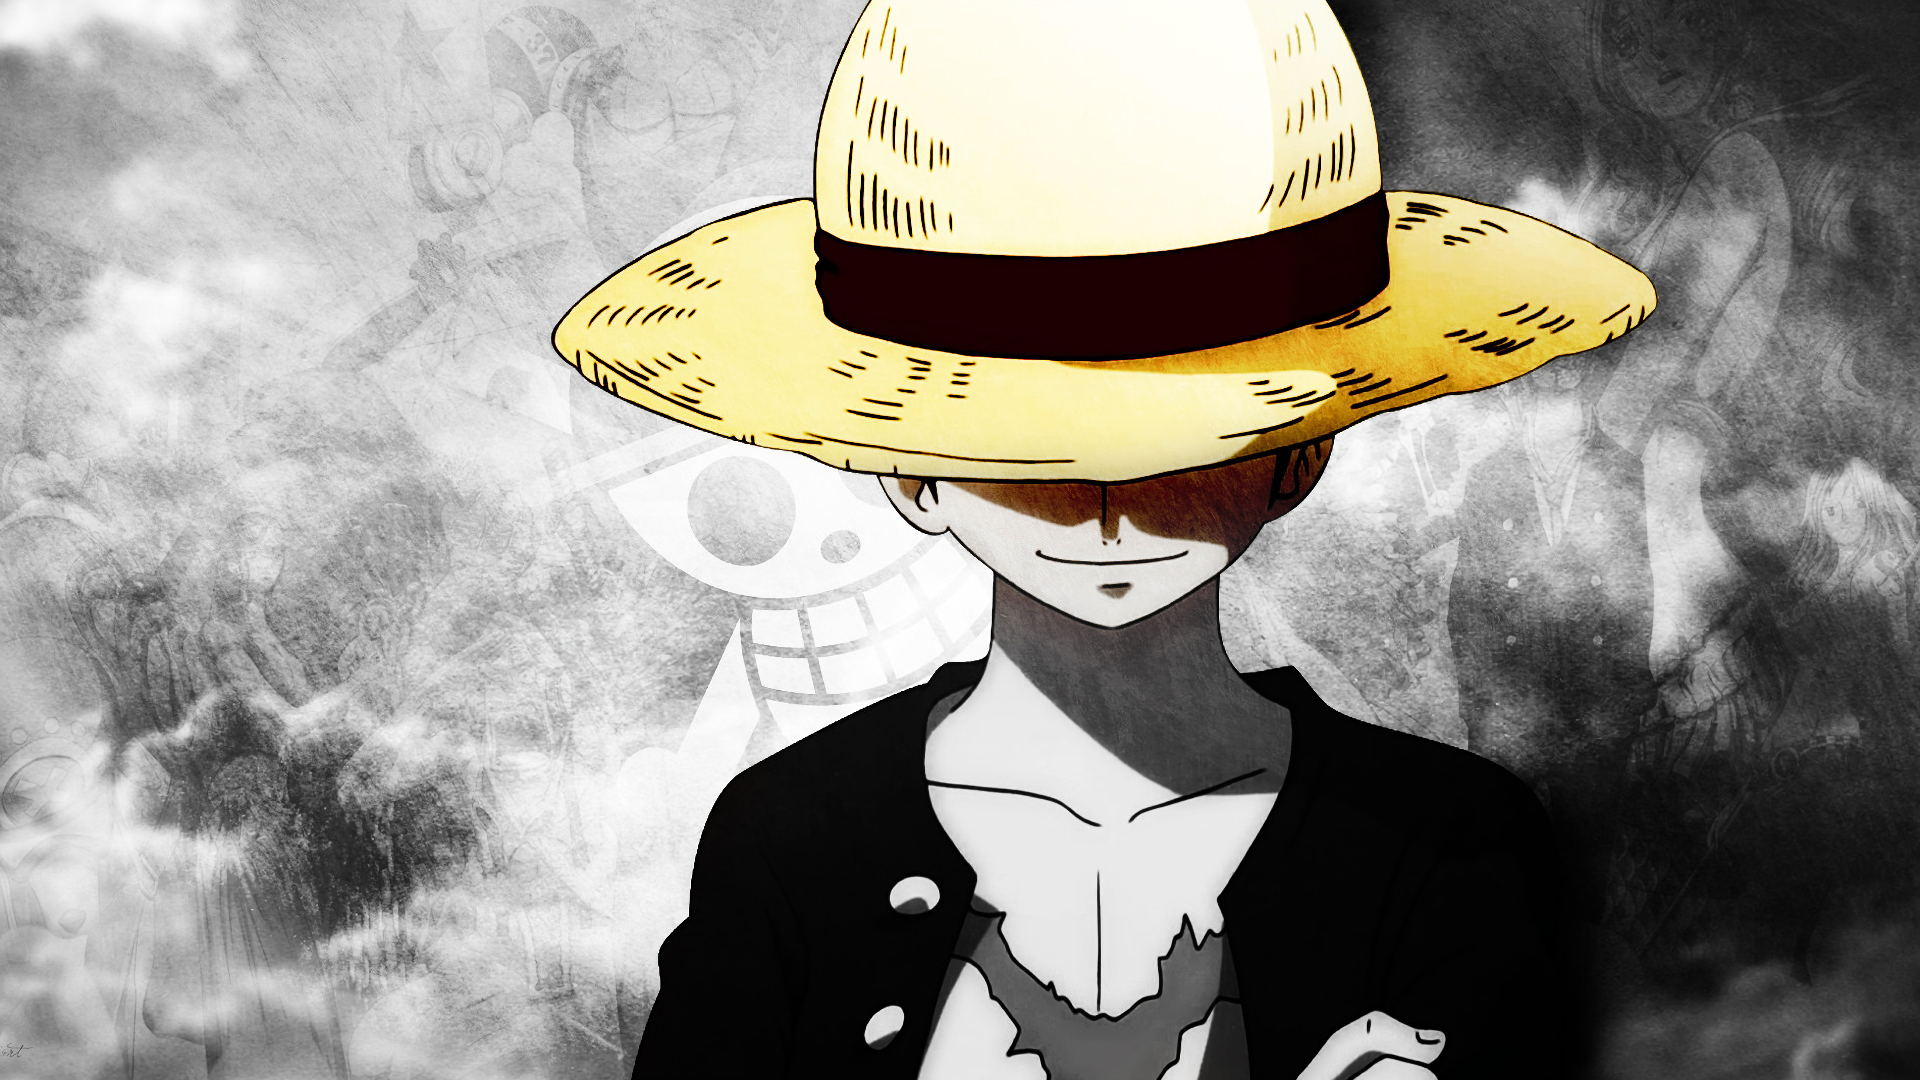  One  Piece  HD  Wallpaper  Background Image 1920x1080 ID 